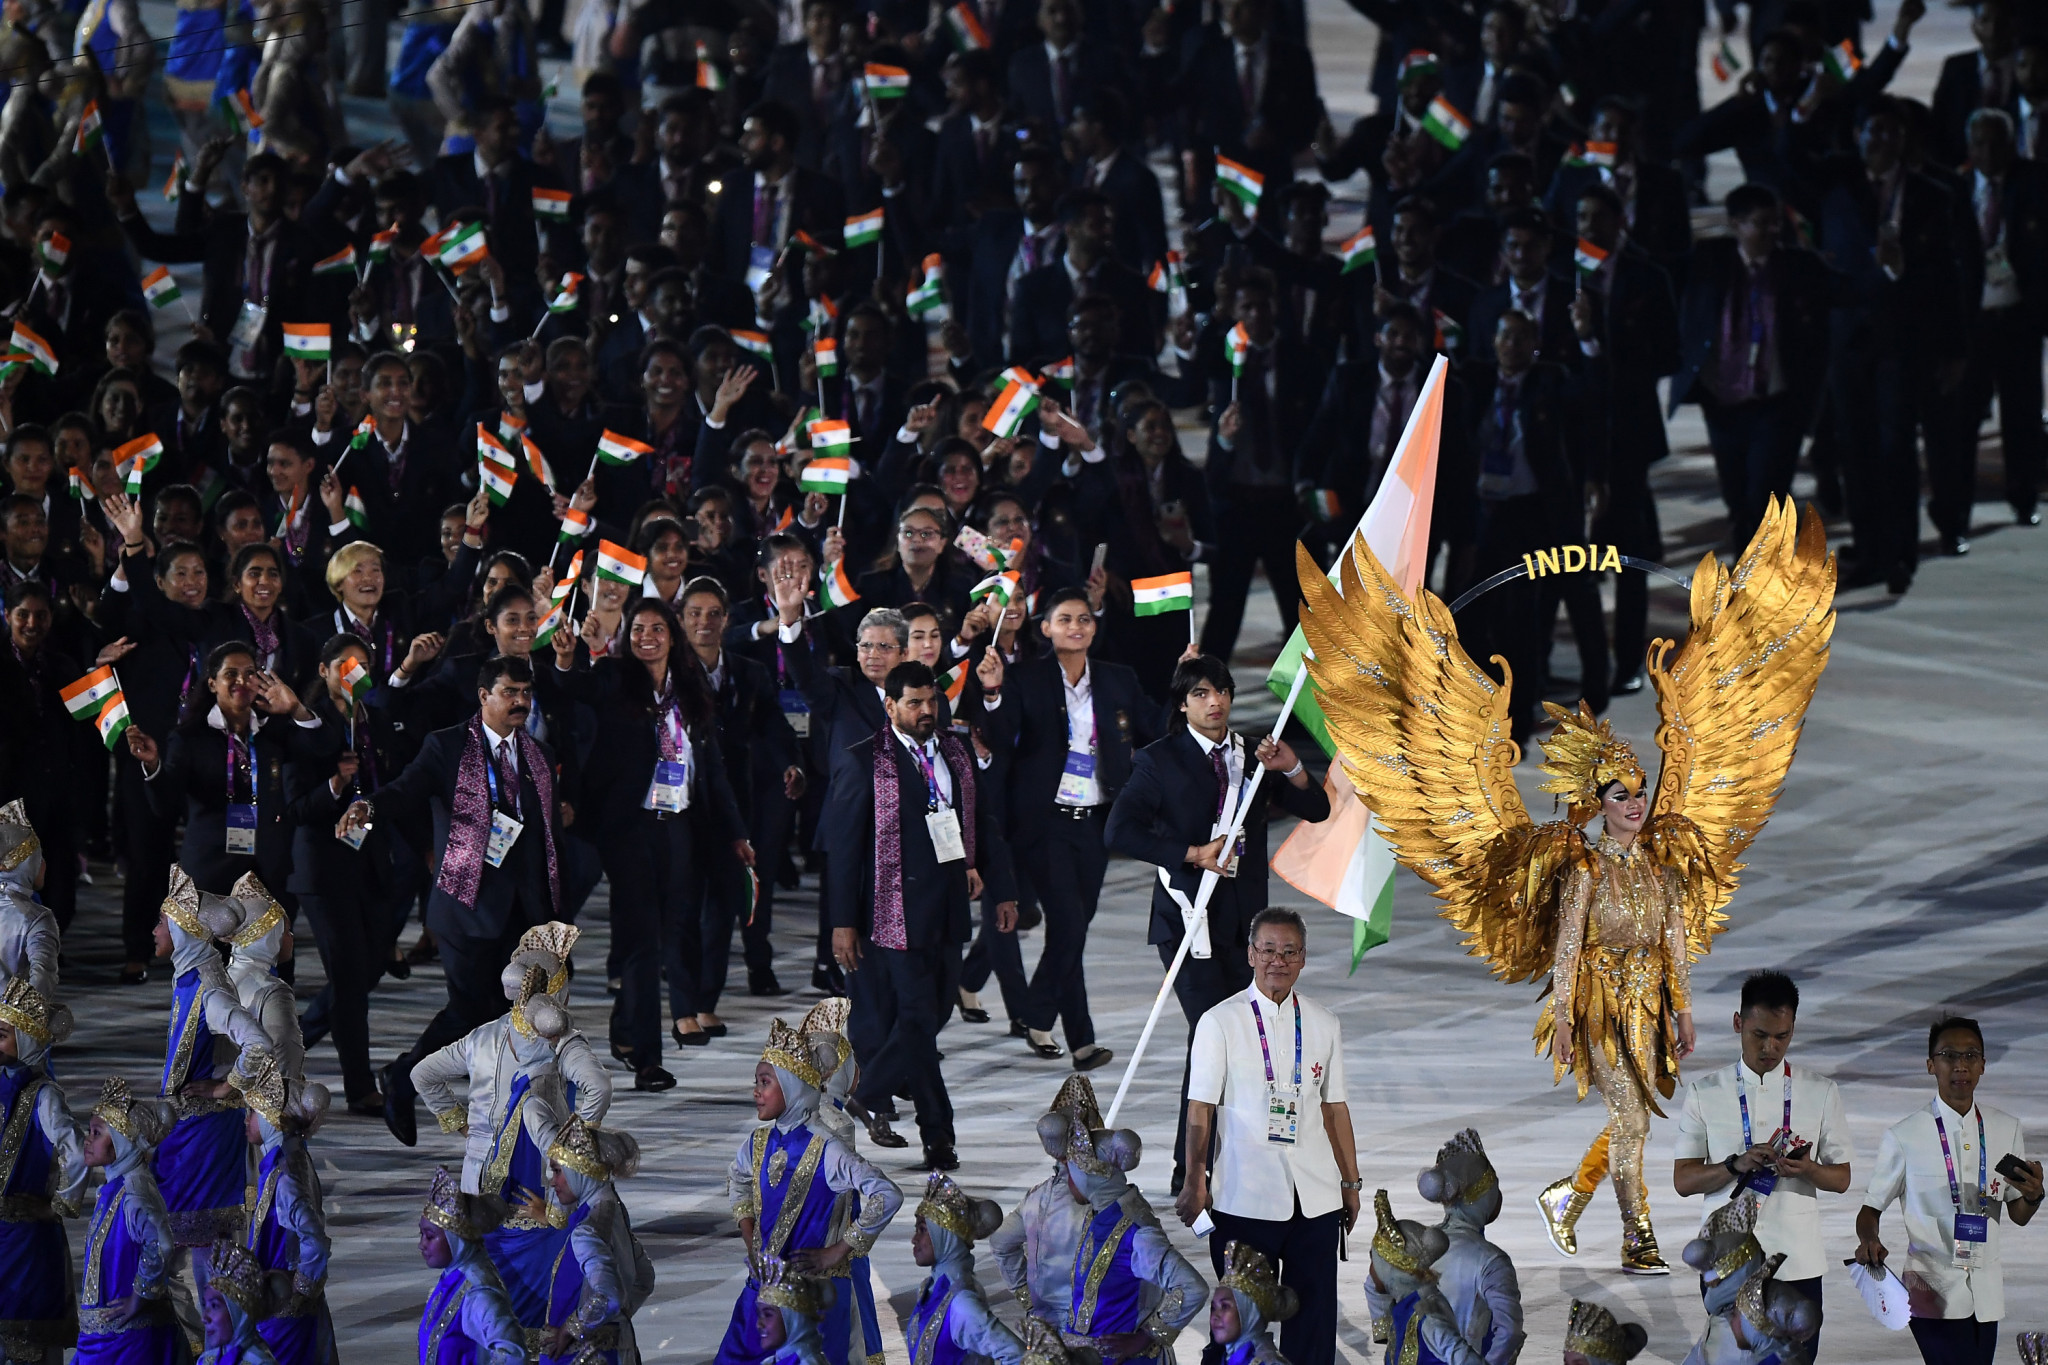 India amassed a best-ever Asian Games medal tally of 69 at Jakarta Palembang 2018 ©Getty Images